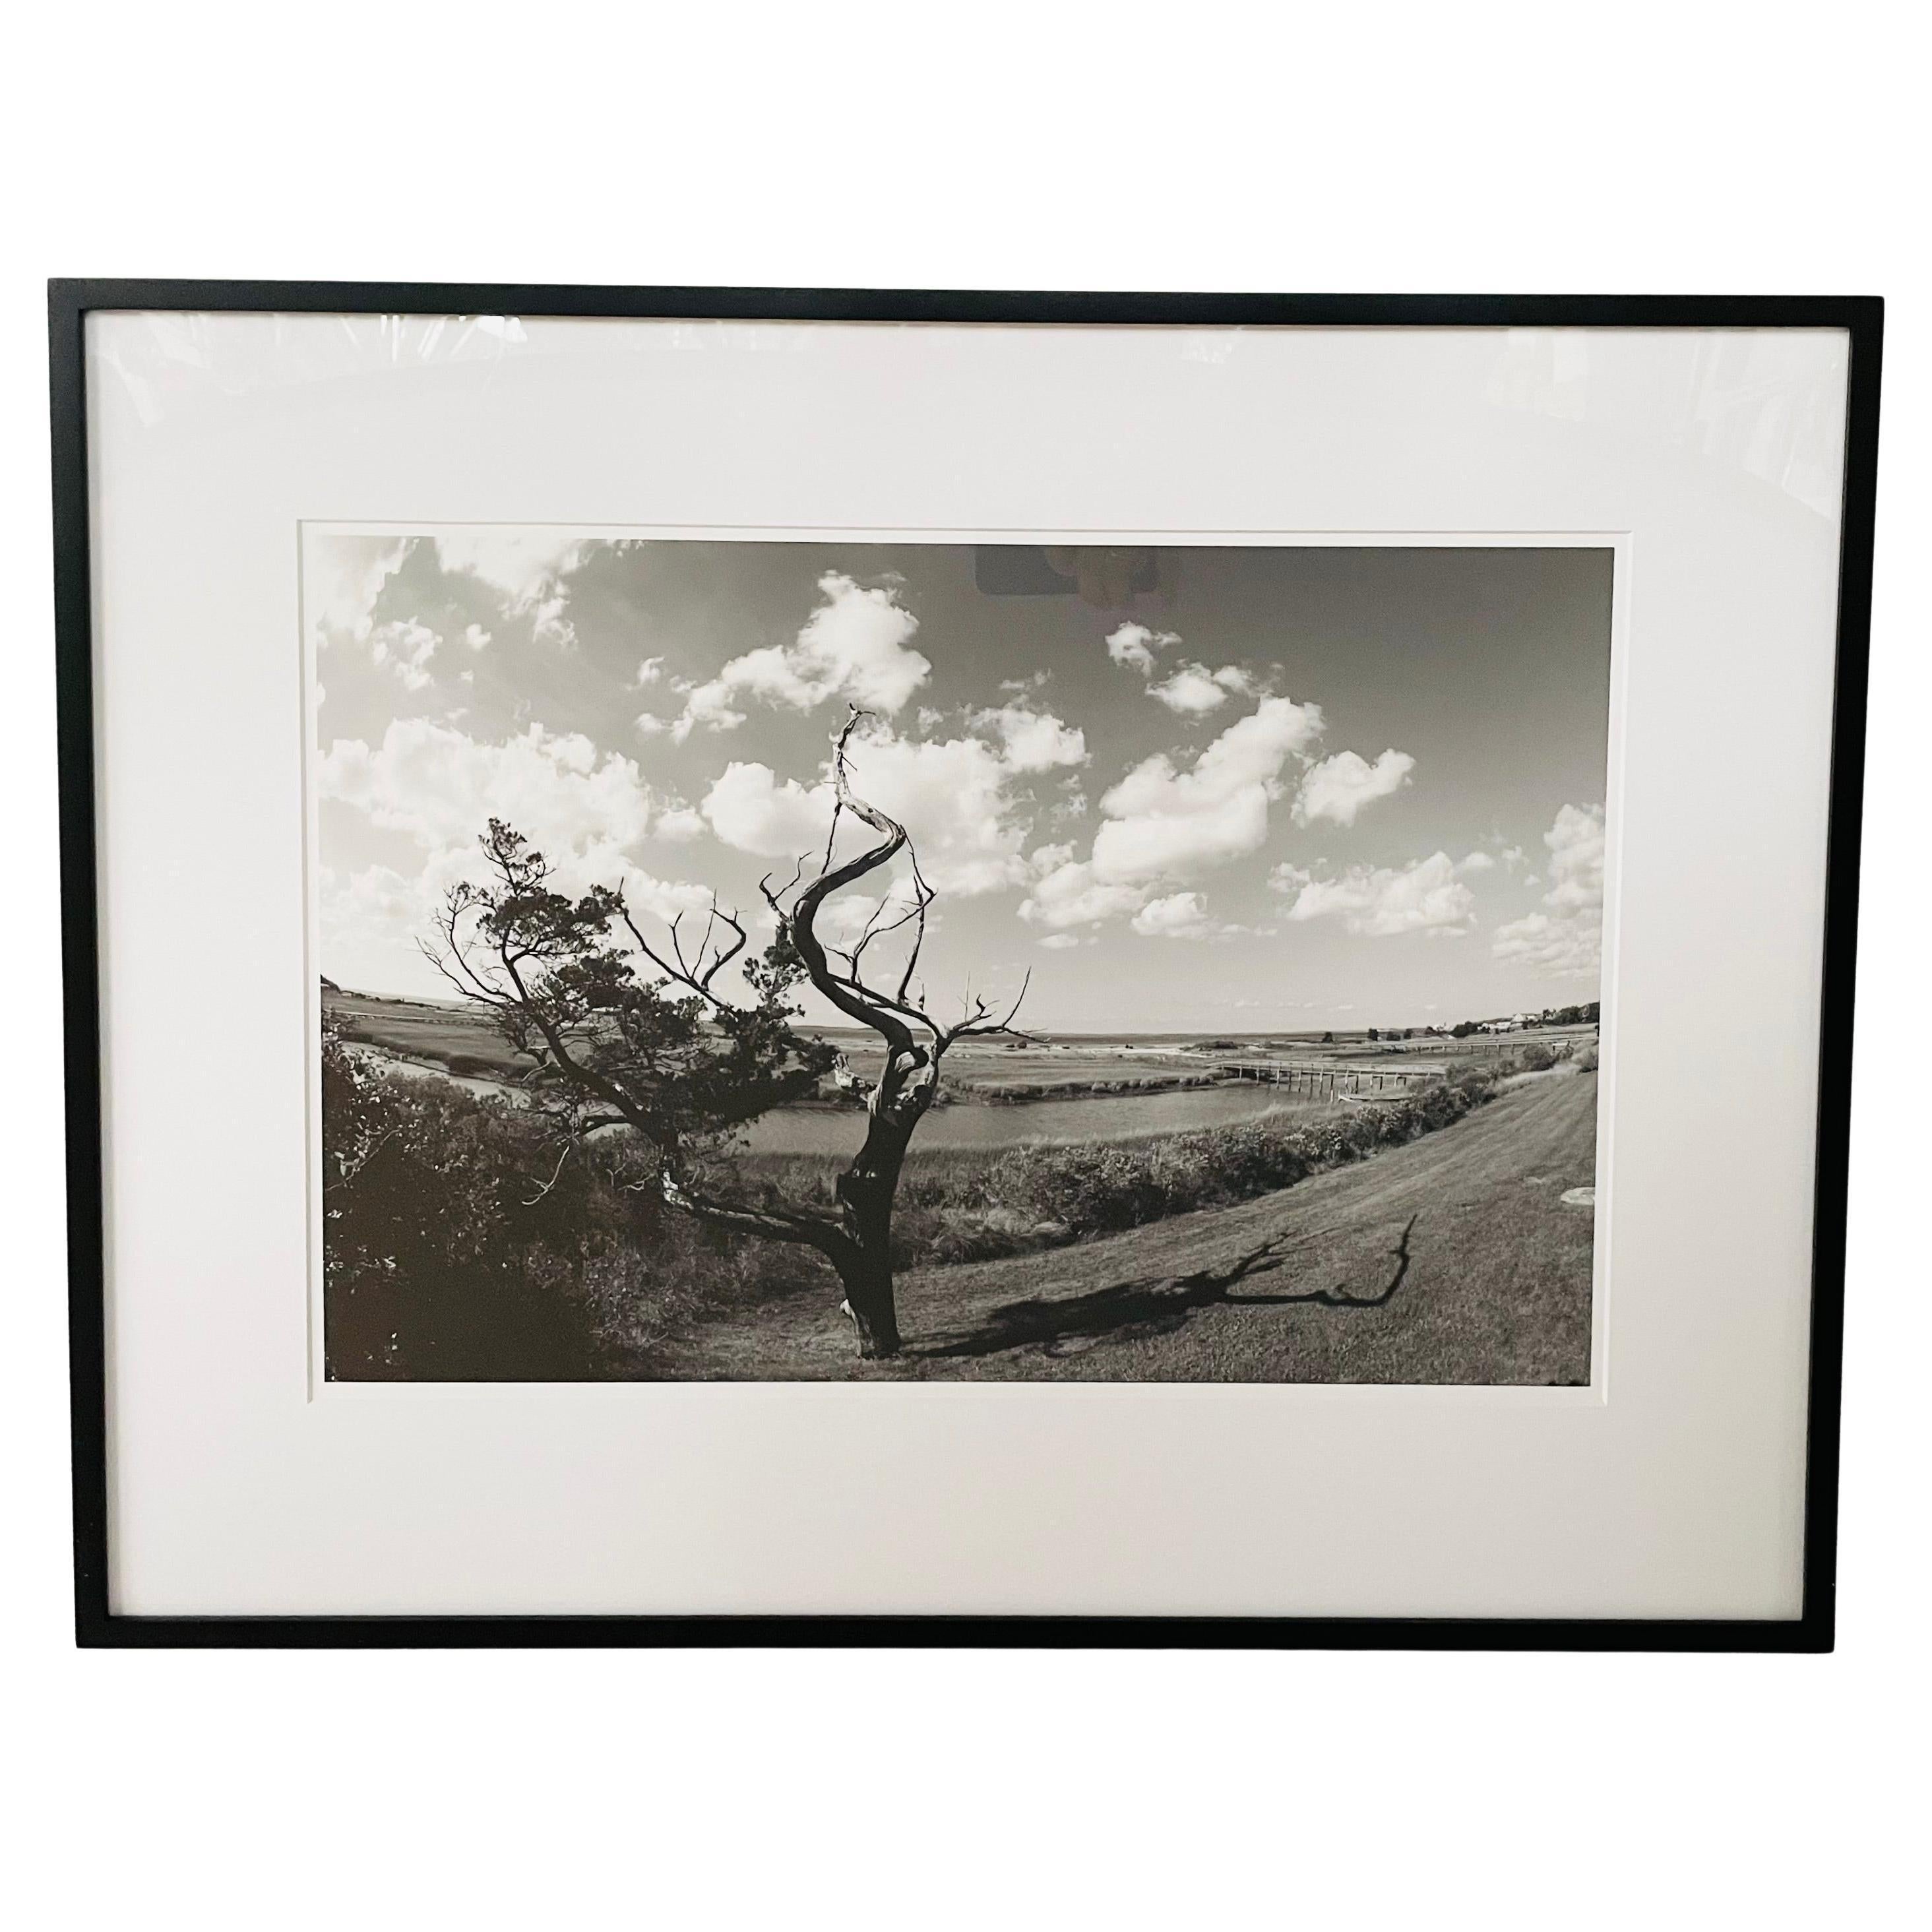 An impressionistic photography archival pigment print titled "Tree" by Luciana Pampalone ( American, 1961) limited edition 1/20 in black and white, framed and matted. The print comes with a certificate of authenticity. 

Dimensions: 25" W x 19.25" H